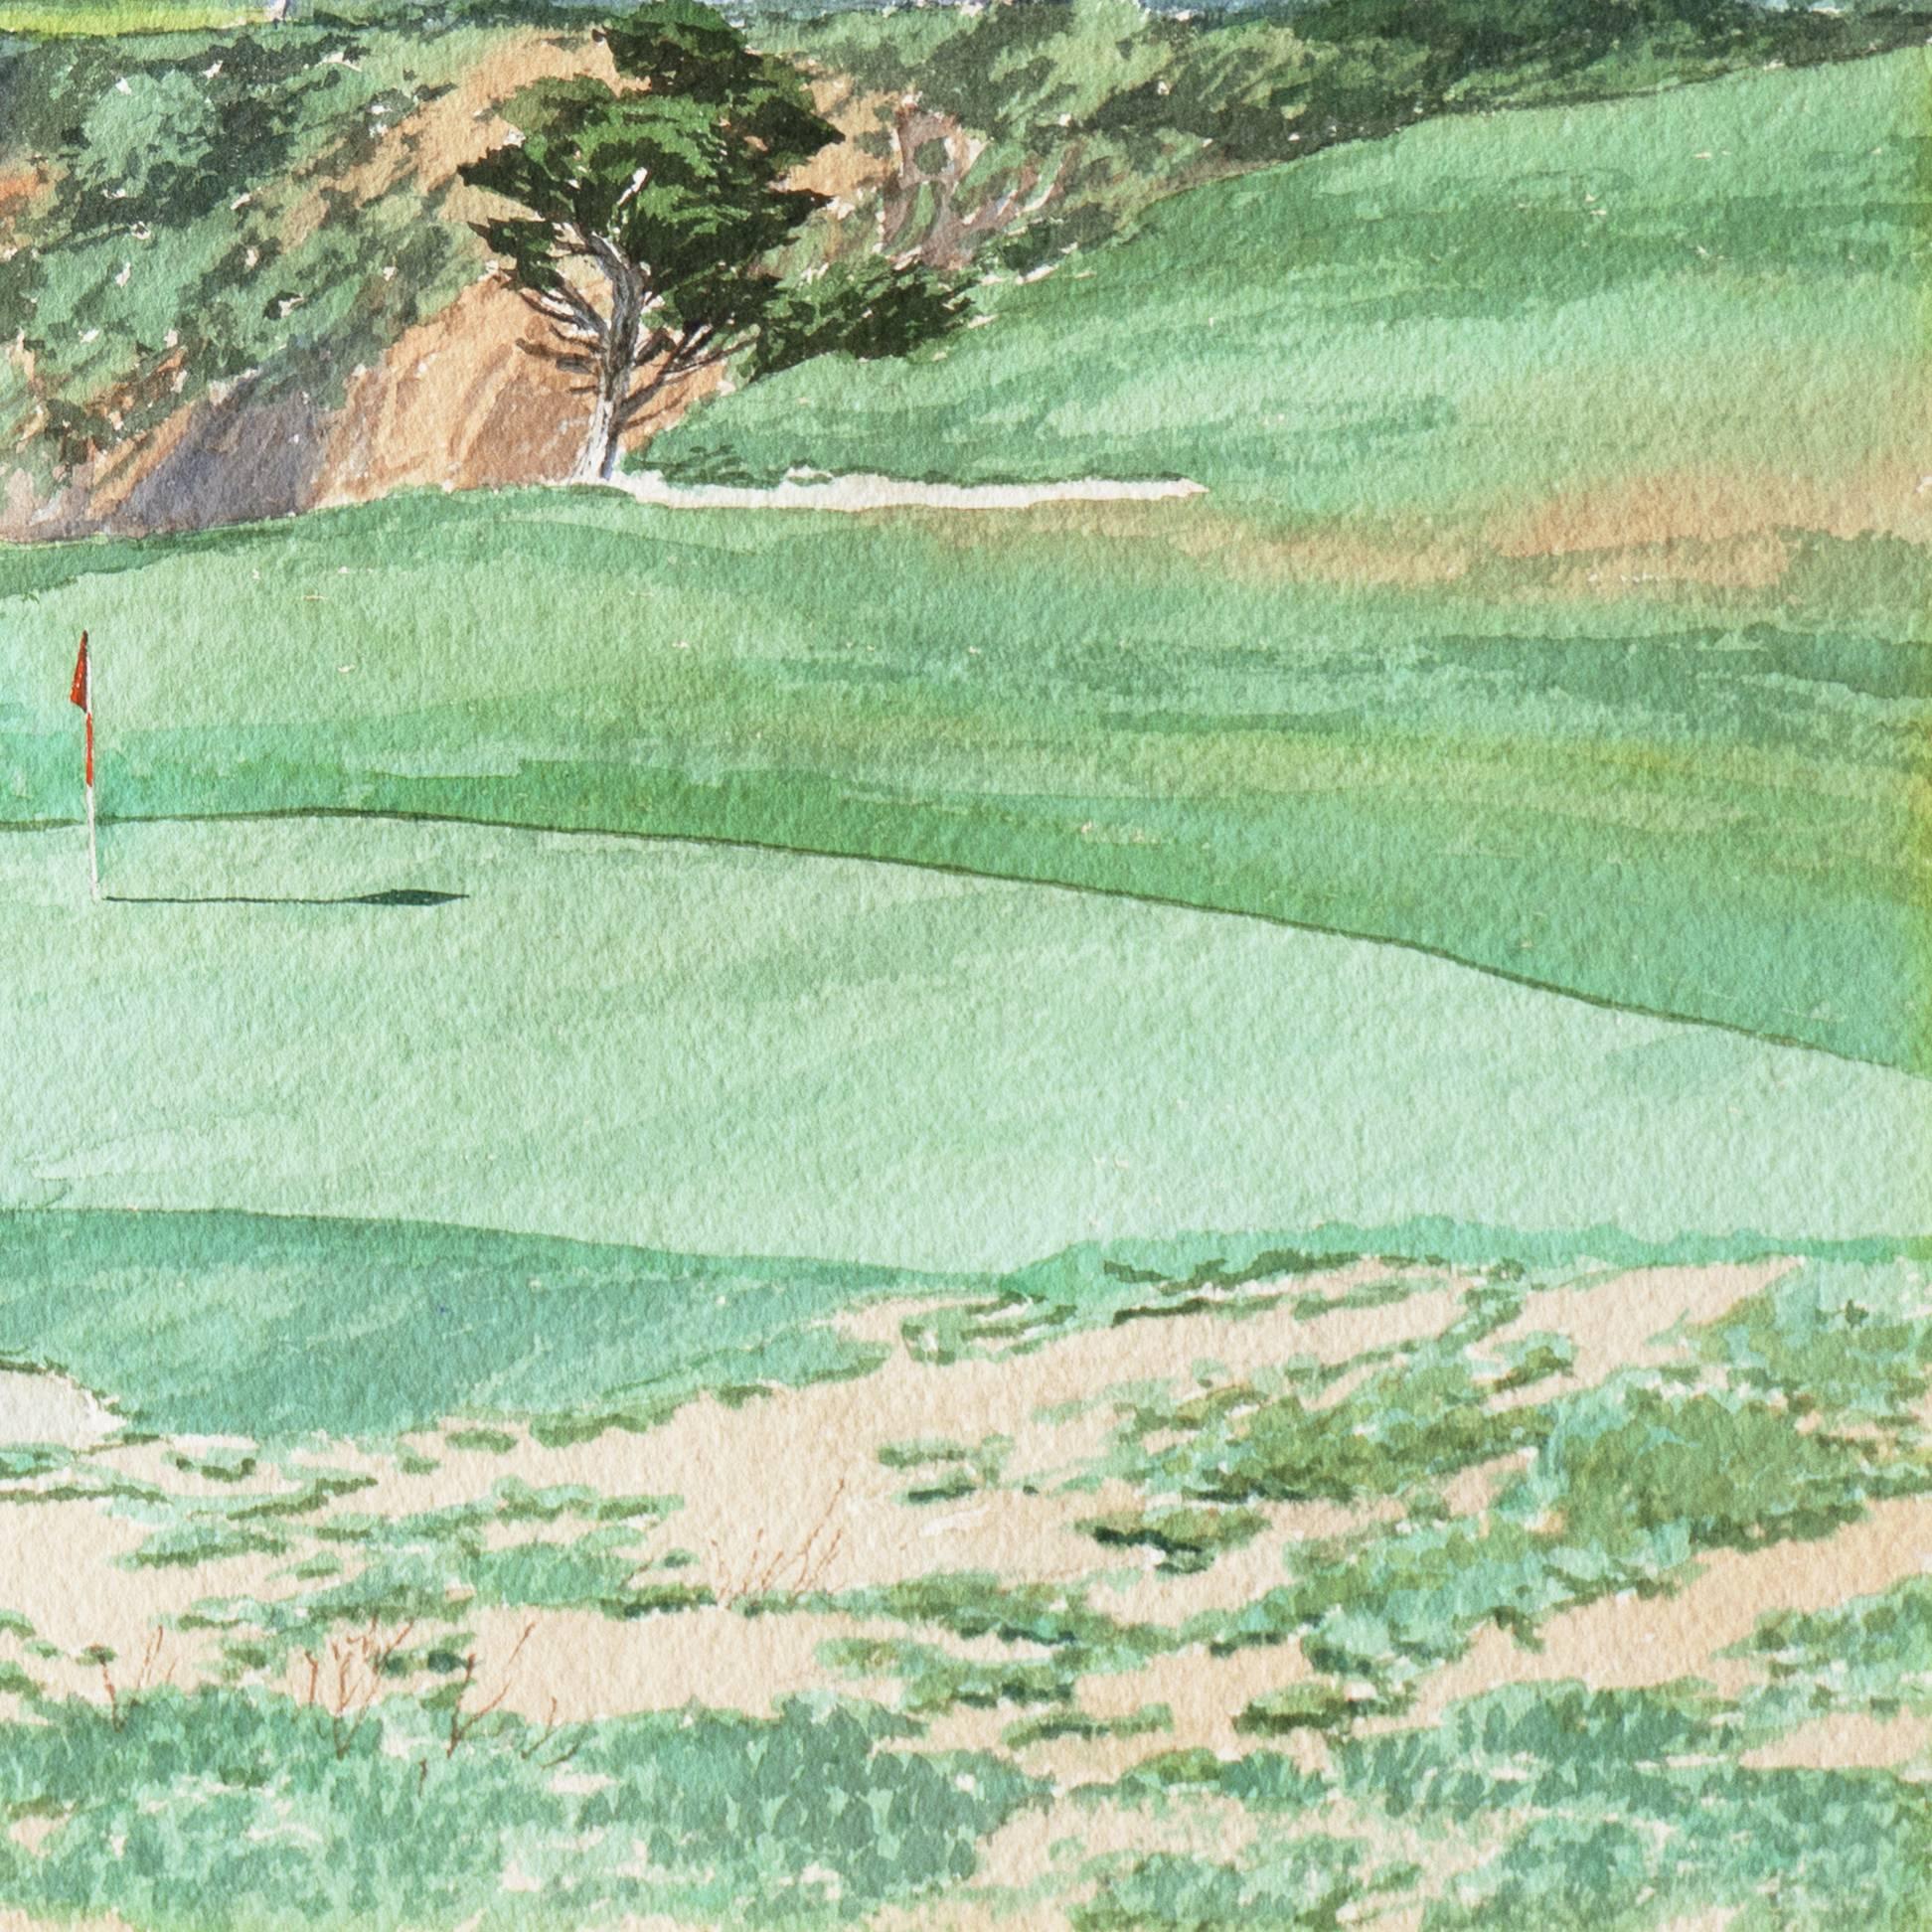 'Golf at Pebble Beach', Monterey, California - Gray Landscape Art by James March Phillips